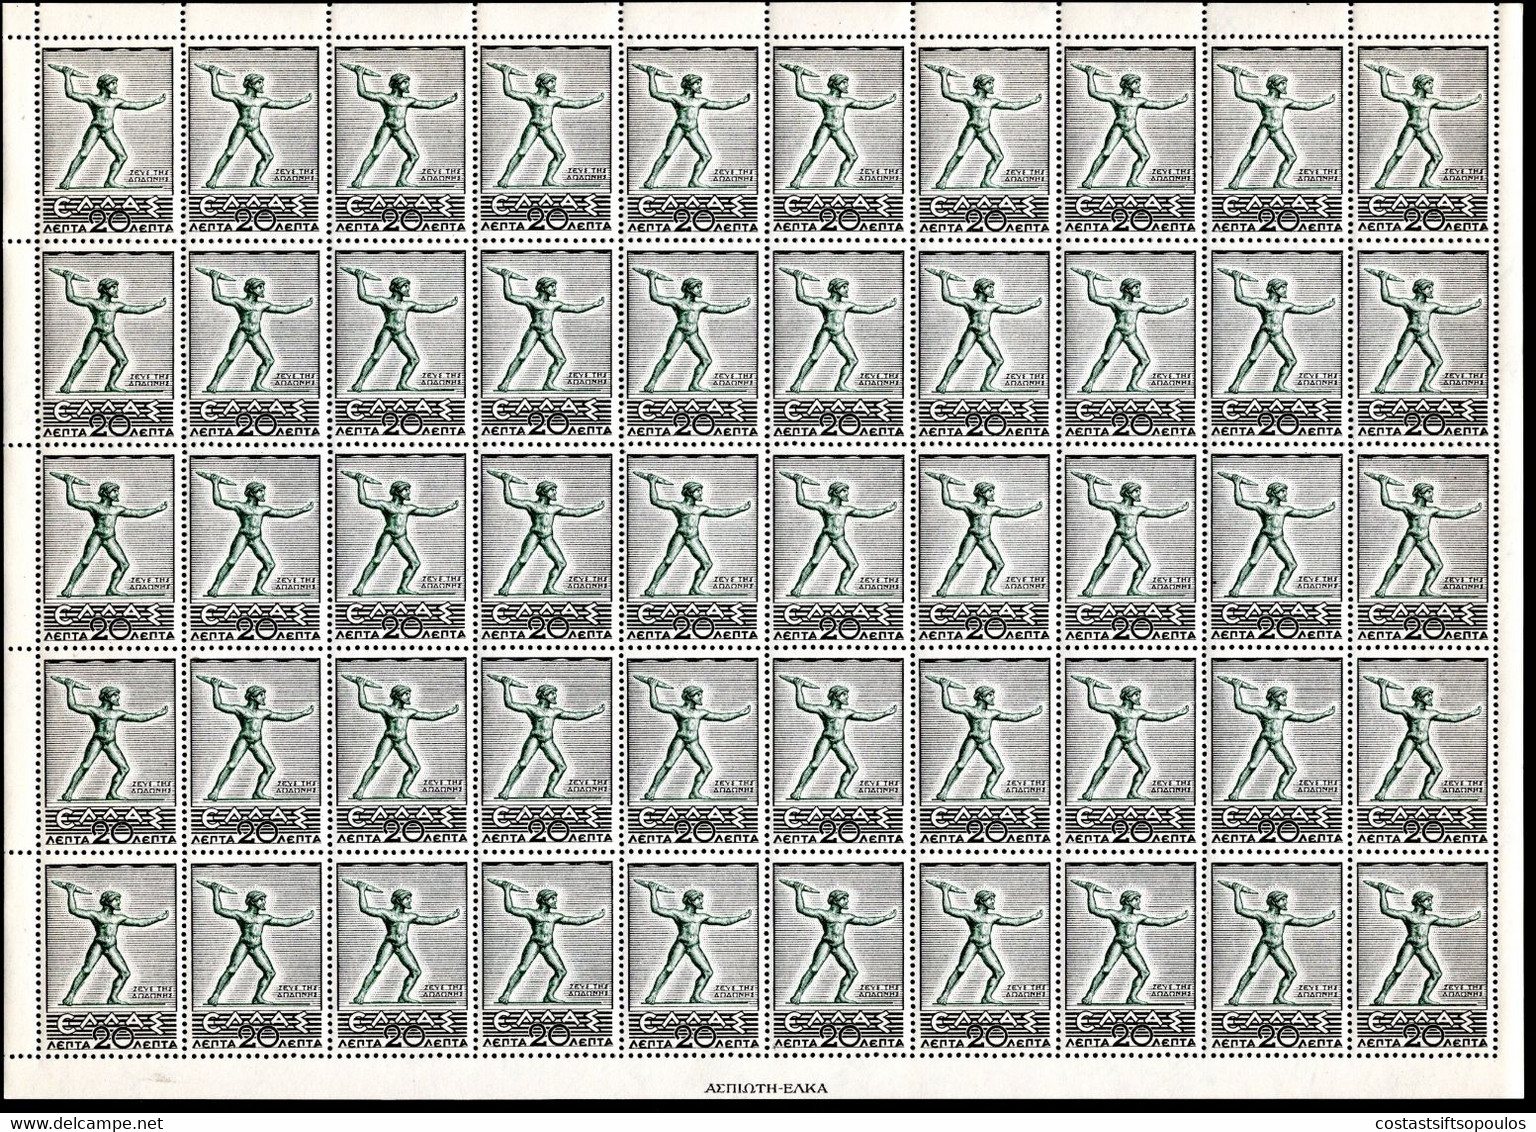 457.GREECE.1937 HISTORICAL.20 L.ZEUS,MNH SHEET OF 50.FOLDED IN THE MIDDLE,WILL BE SHIPPED FOLDED - Hojas Completas